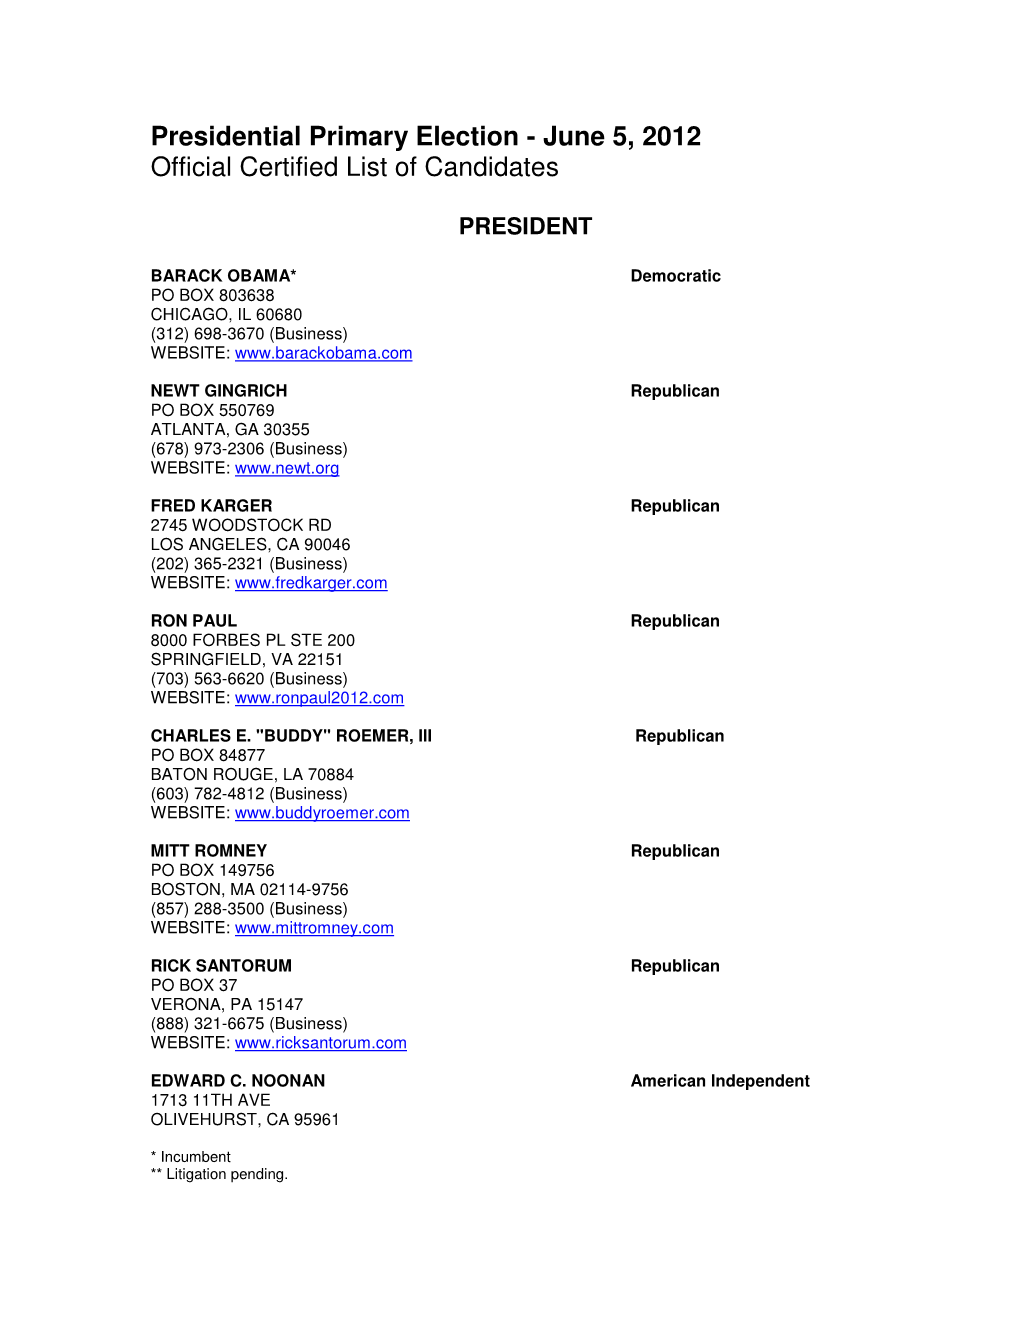 Presidential Primary Election - June 5, 2012 Official Certified List of Candidates